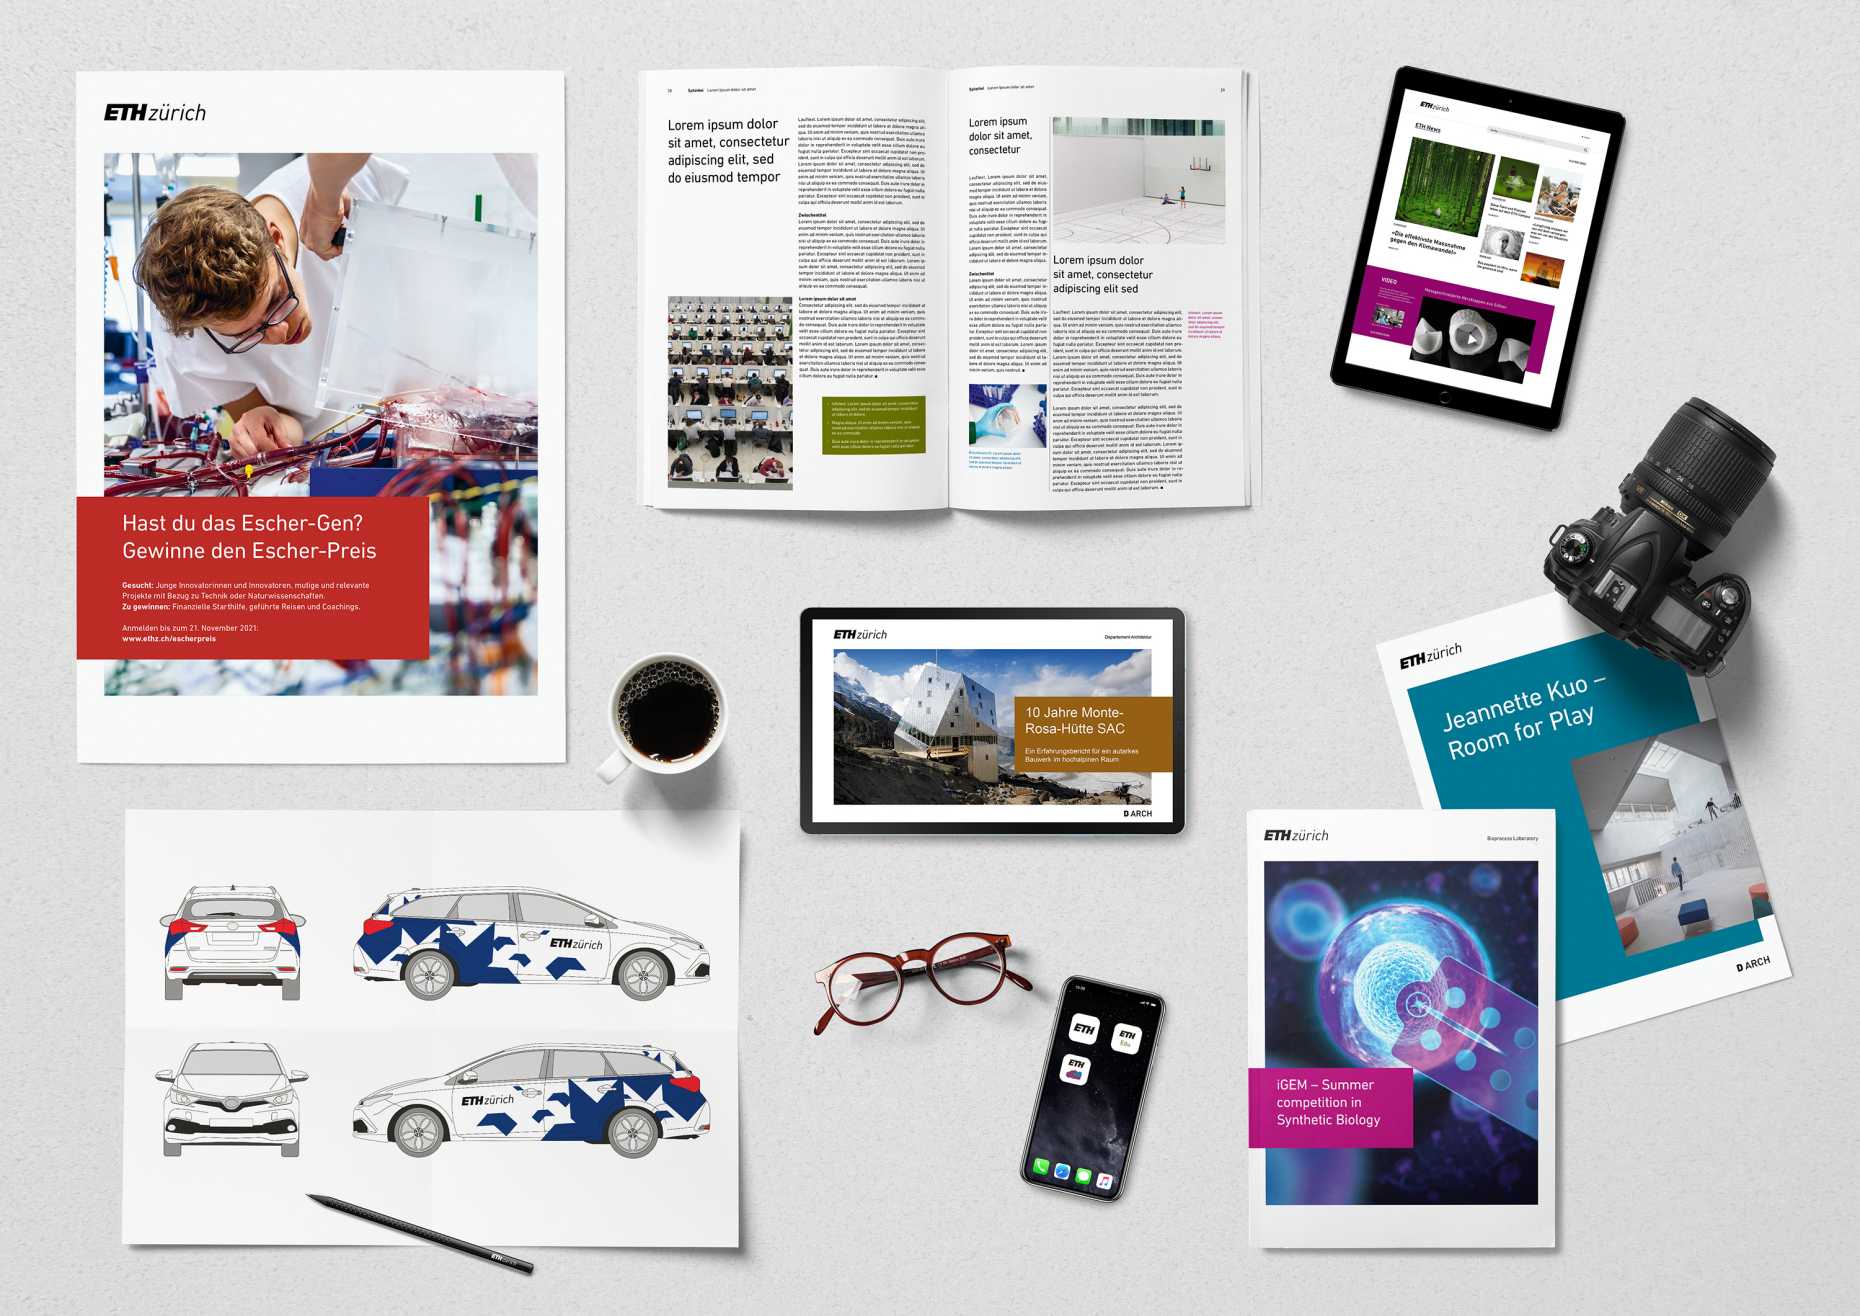 Enlarged view: Different publications and product in the new ETH corporate design arrenged next to eachother